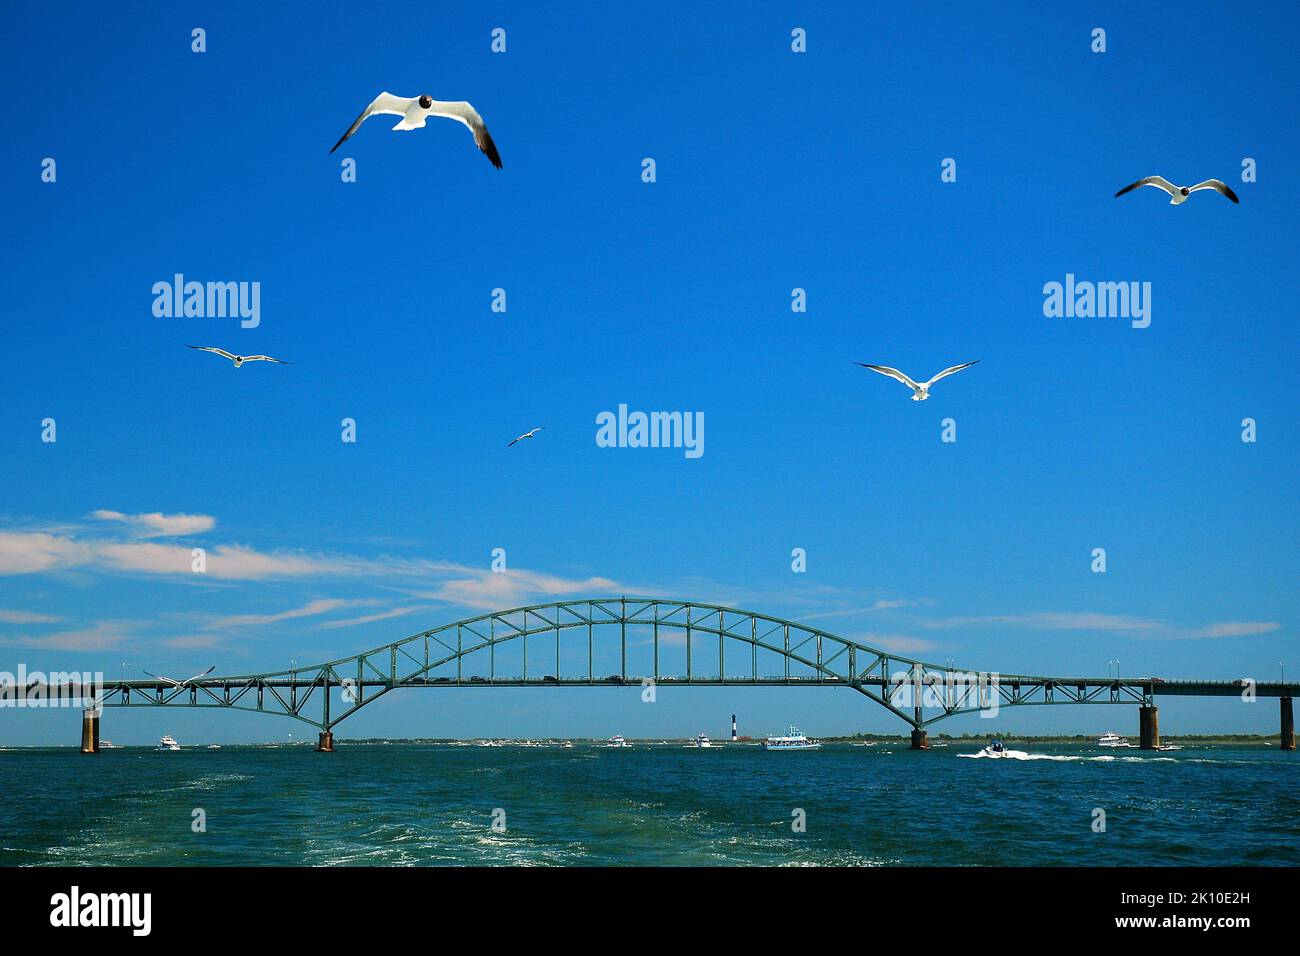 A seagull glides though the summer sky over the bay off Long Island within sight of the Robert Moses Causeway Stock Photo